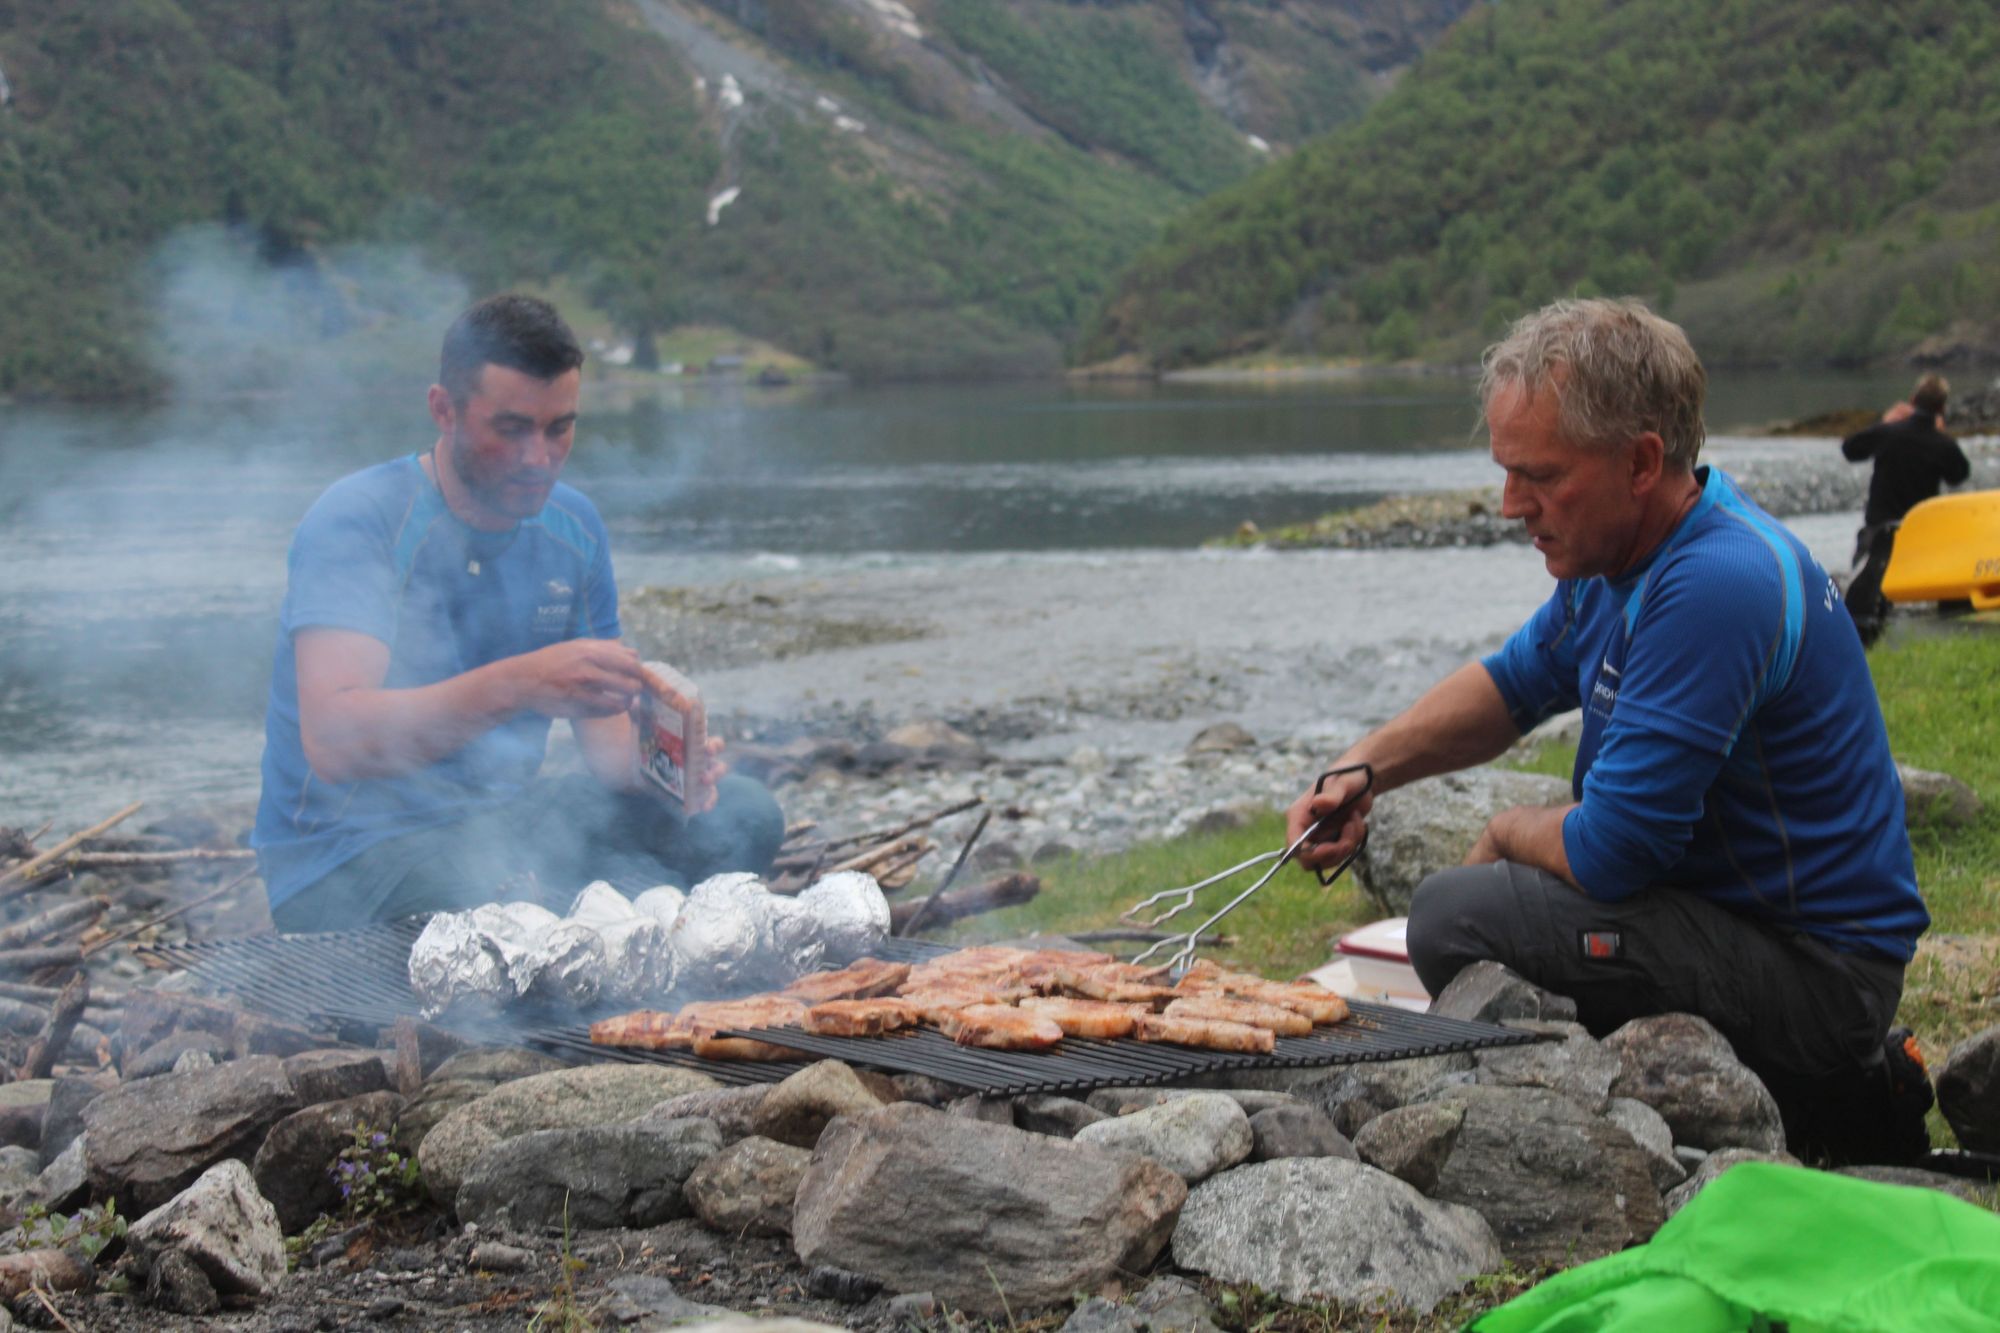 Jan and fellow guide Jordan grilling dinner on the edge of the fjord. Photo: Stuart Kenny